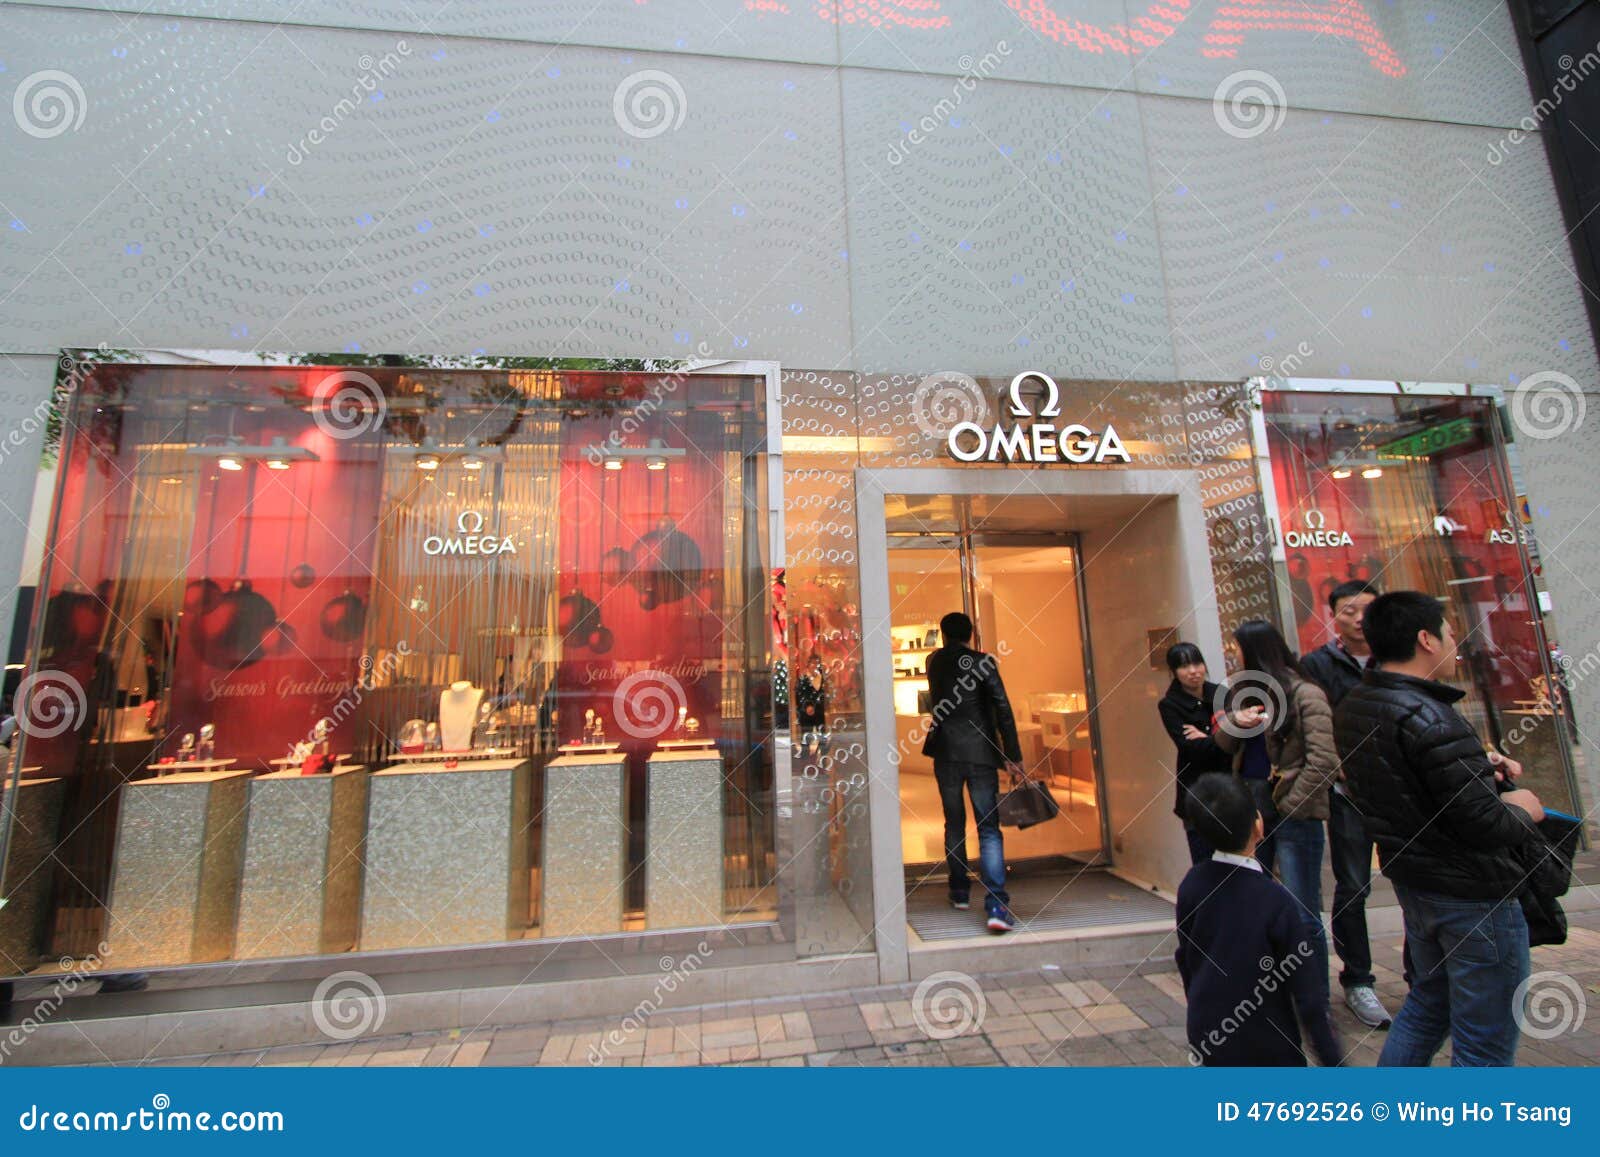 omega watch factory outlet